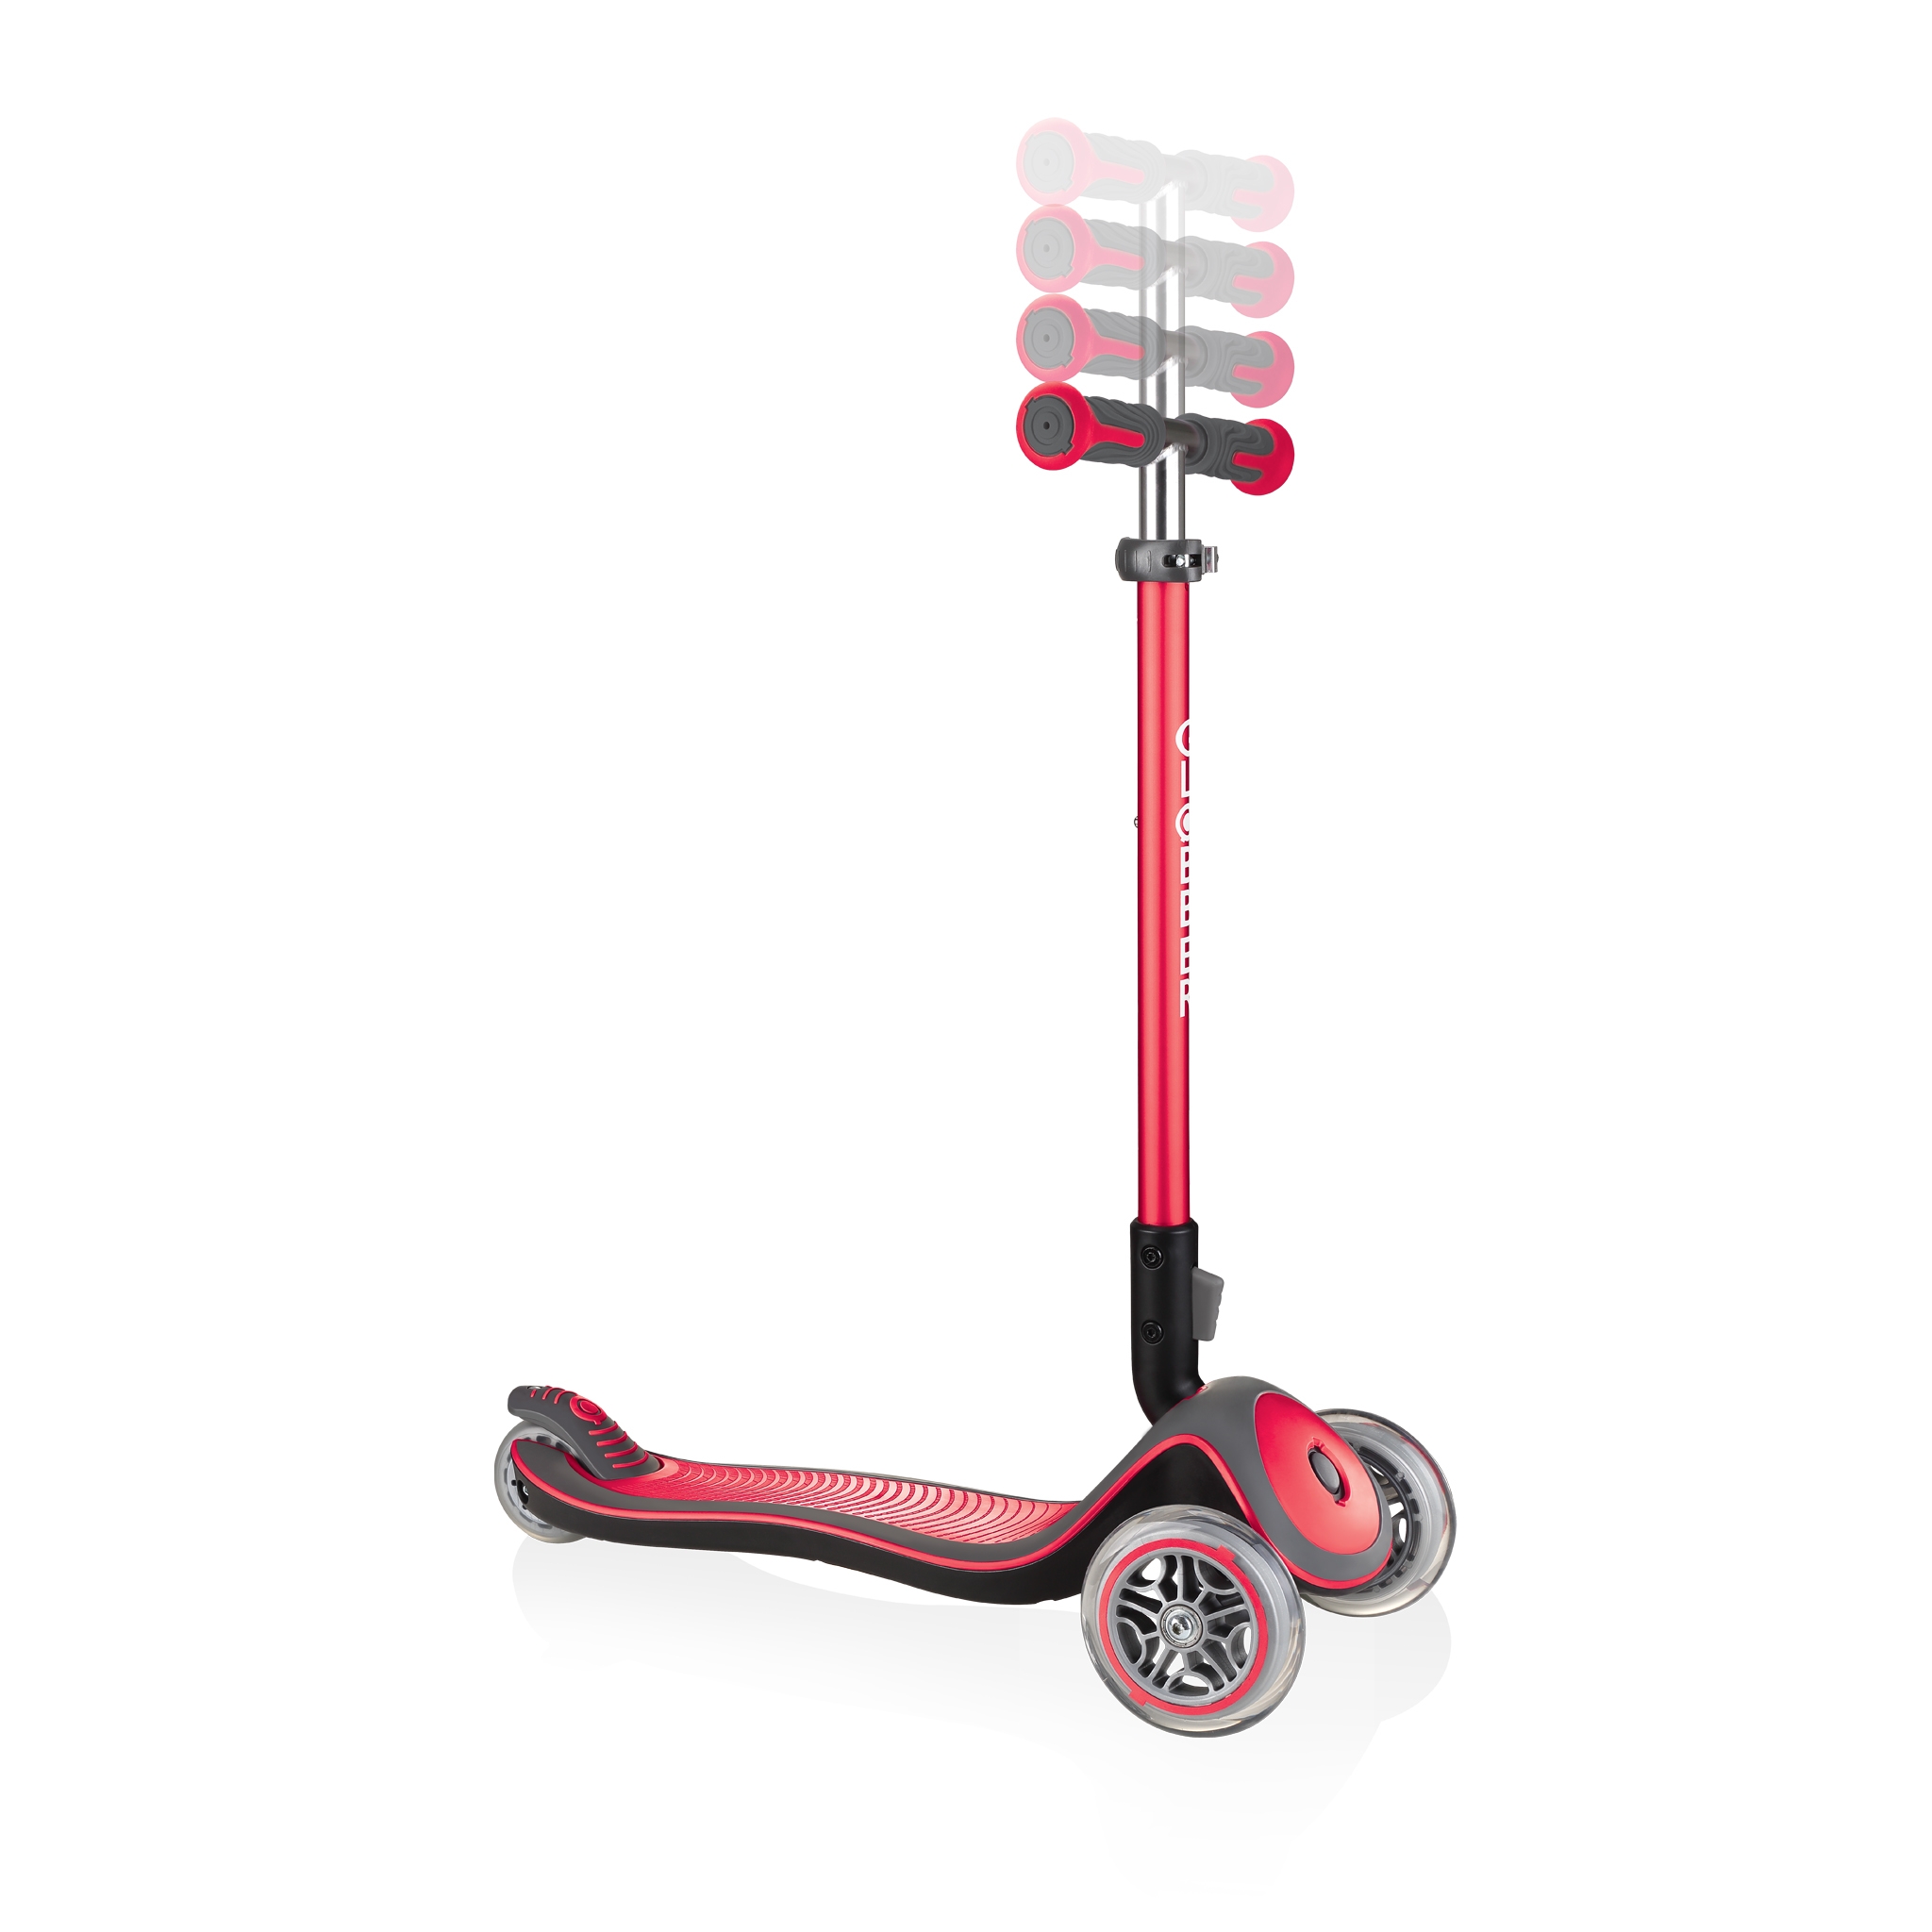 Globber-ELITE-DELUXE-3-wheel-adjustable-scooter-for-kids-with-anodized-T-bar-new-red 1